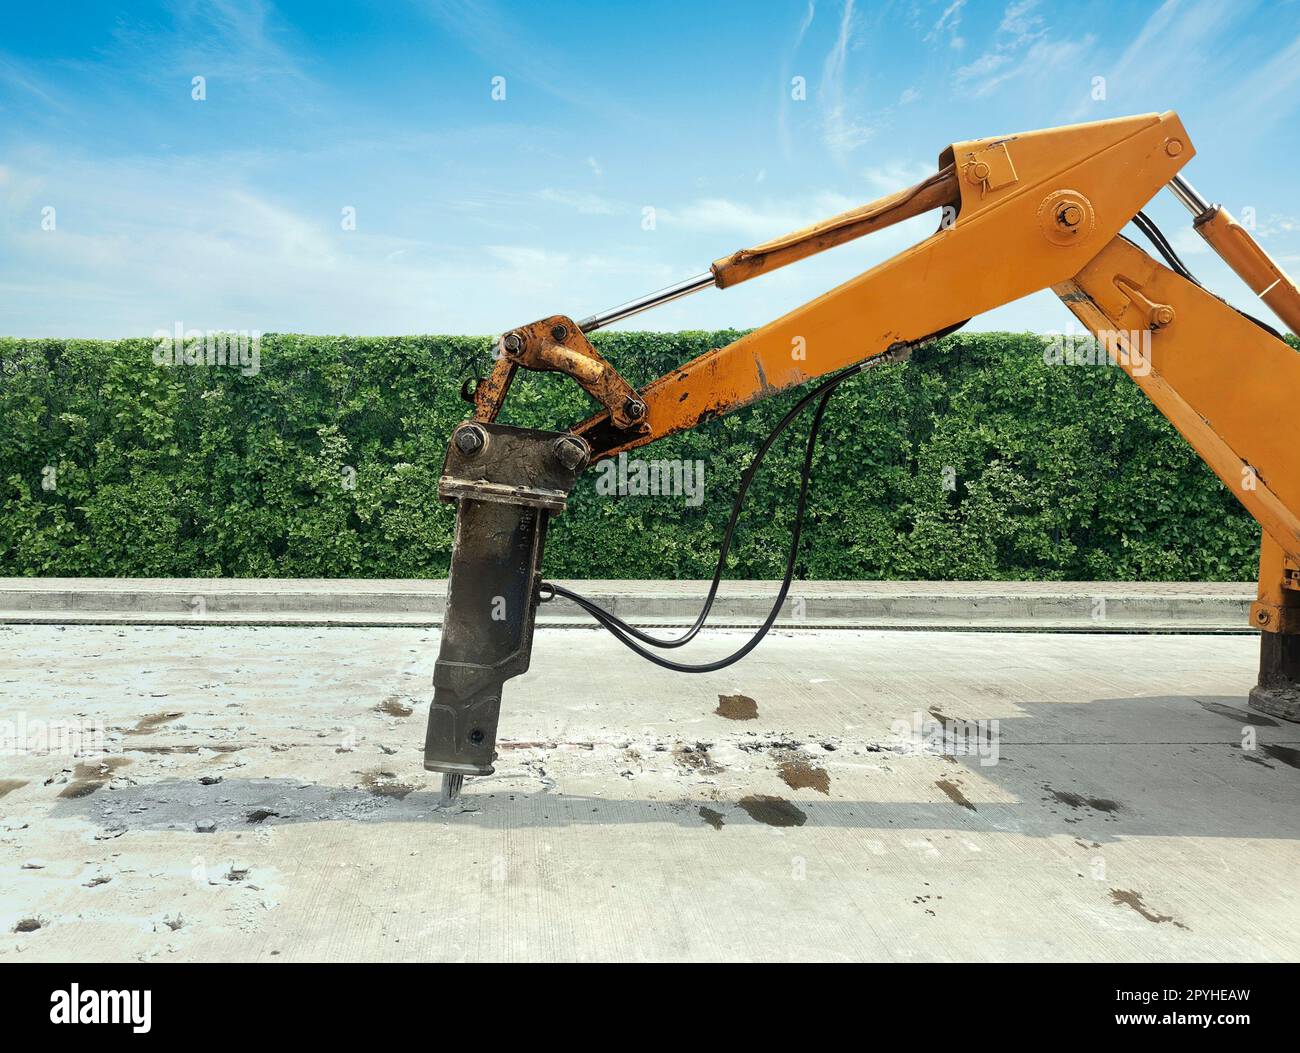 Excavator breaking and drilling the concrete road for repairing. Large pneumatic hammer mounted on the hydraulic arm of a construction equipment.Construction Vehicles repairing road.drilled jackhammer Stock Photo